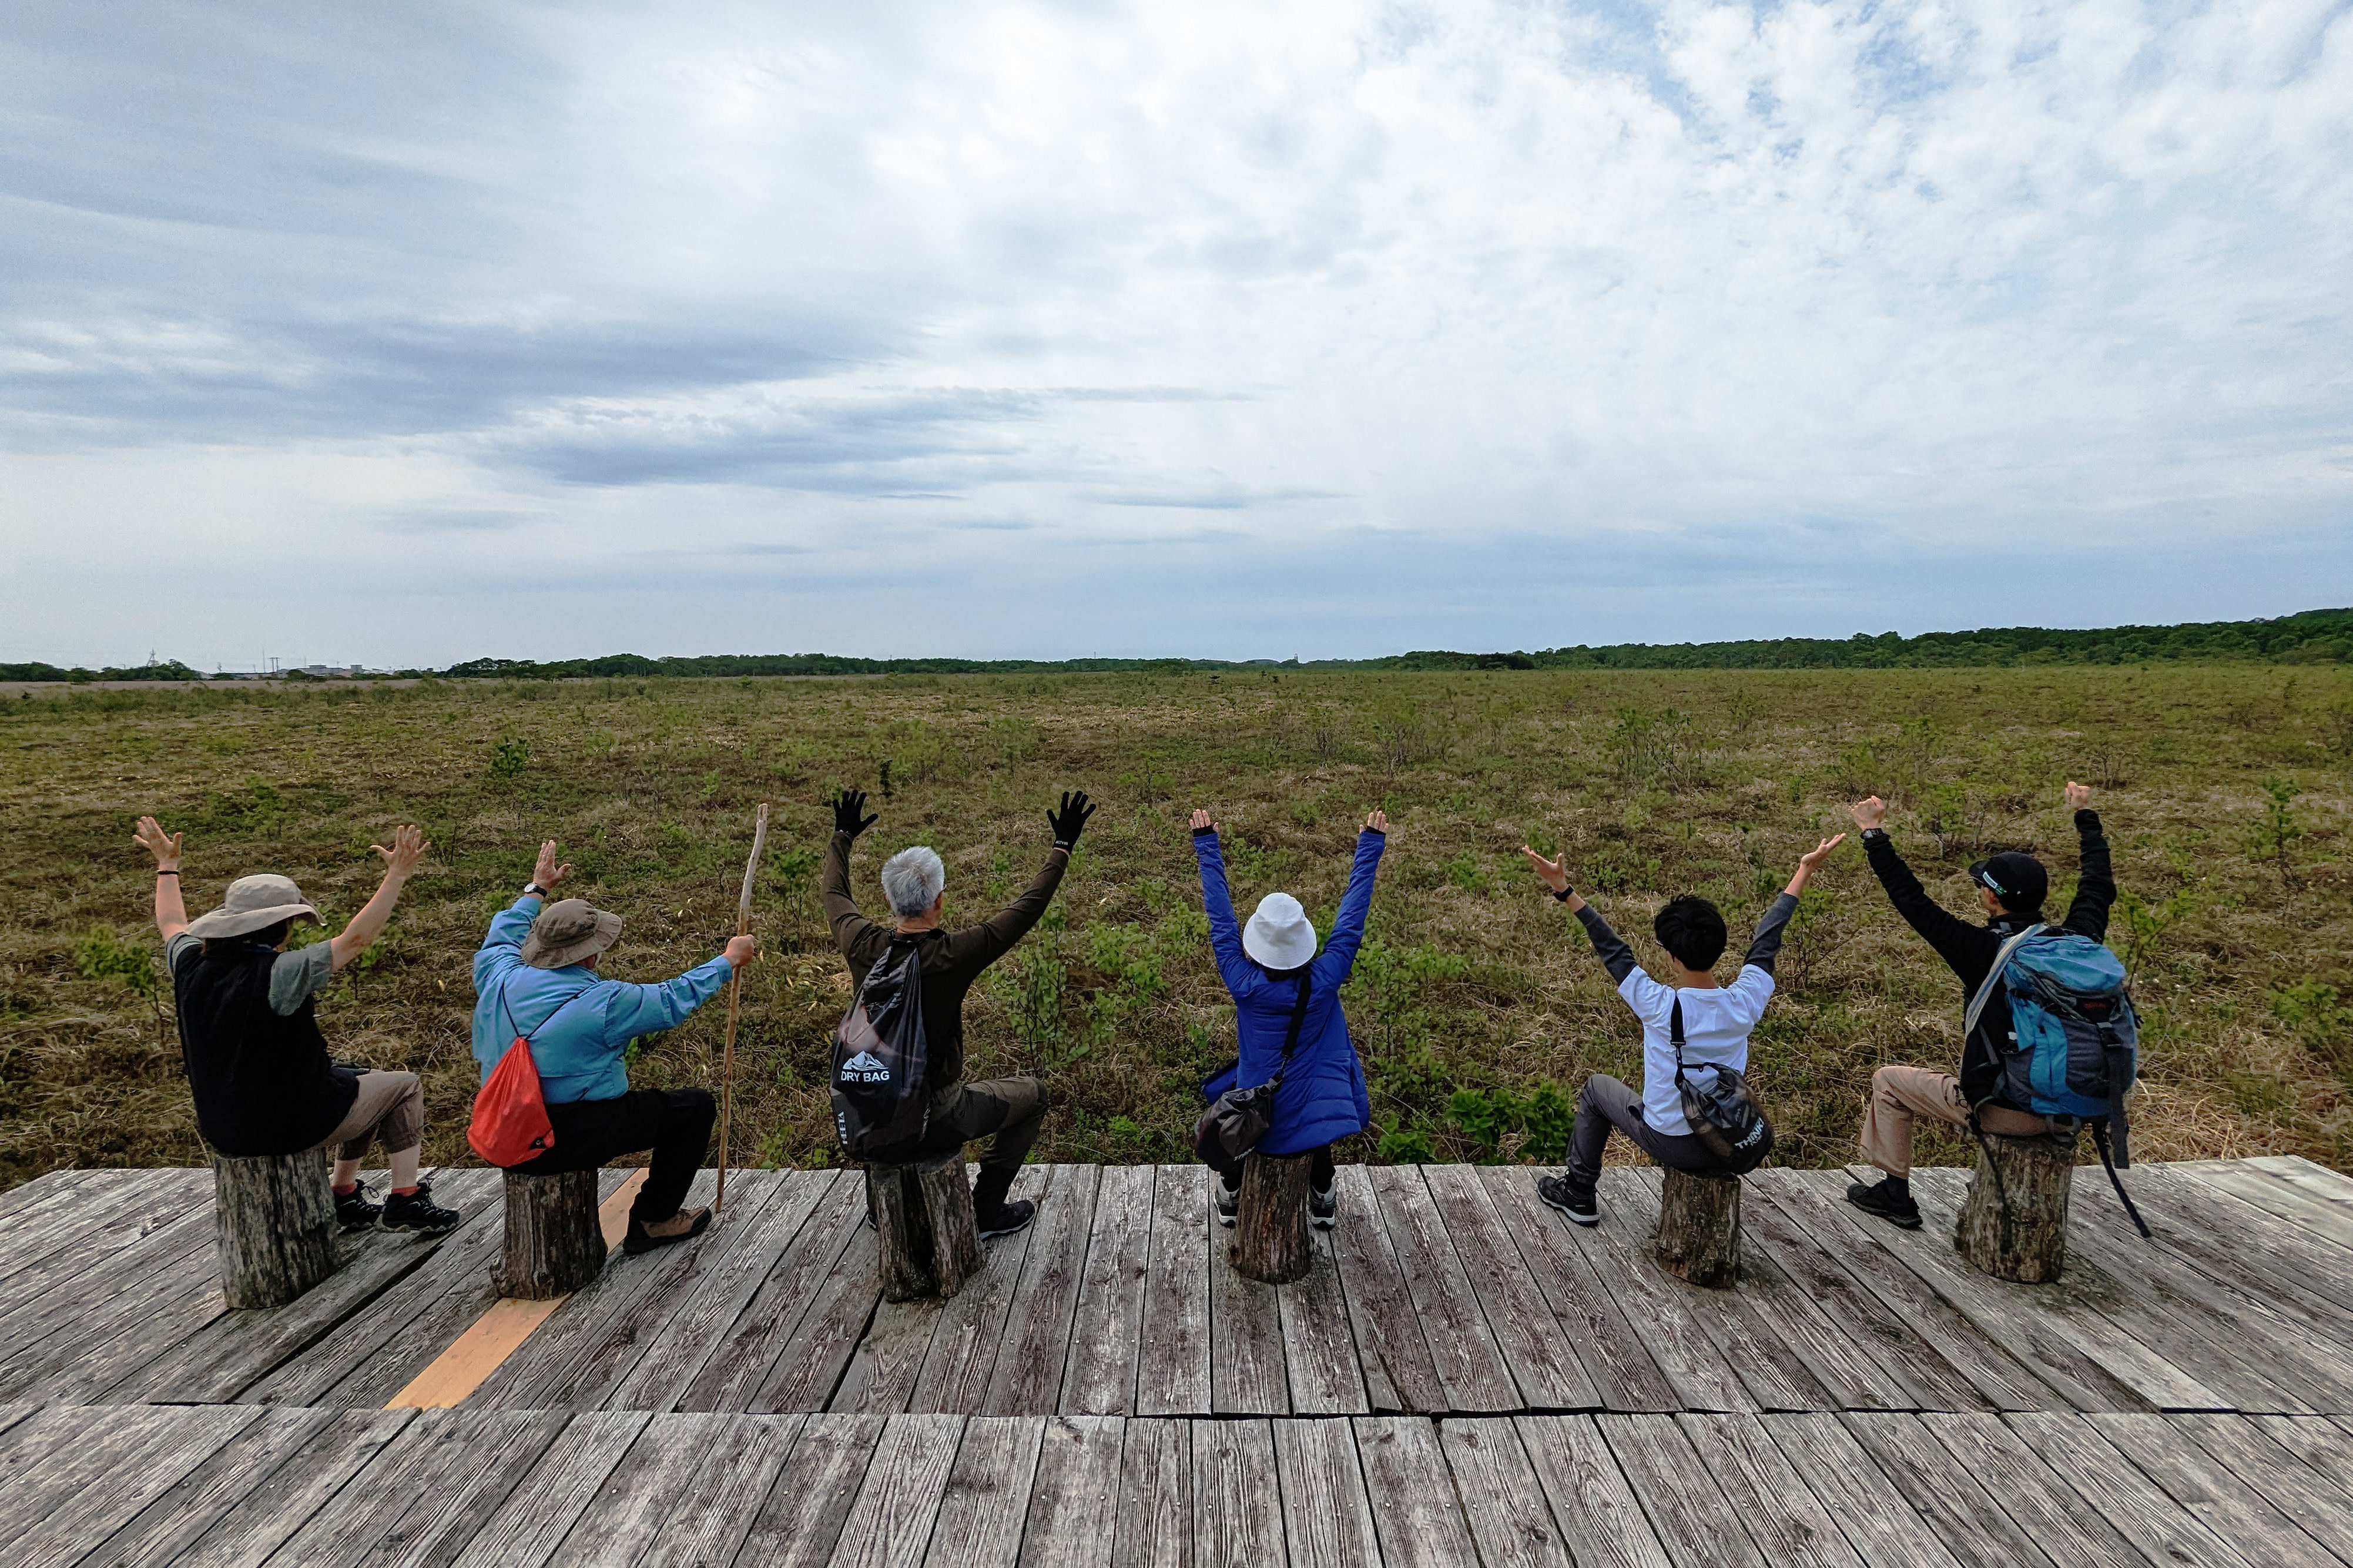 A group of walkers pose for a photo with everyone sat on wooden stools. The group faces away from the camera and towards a wetland